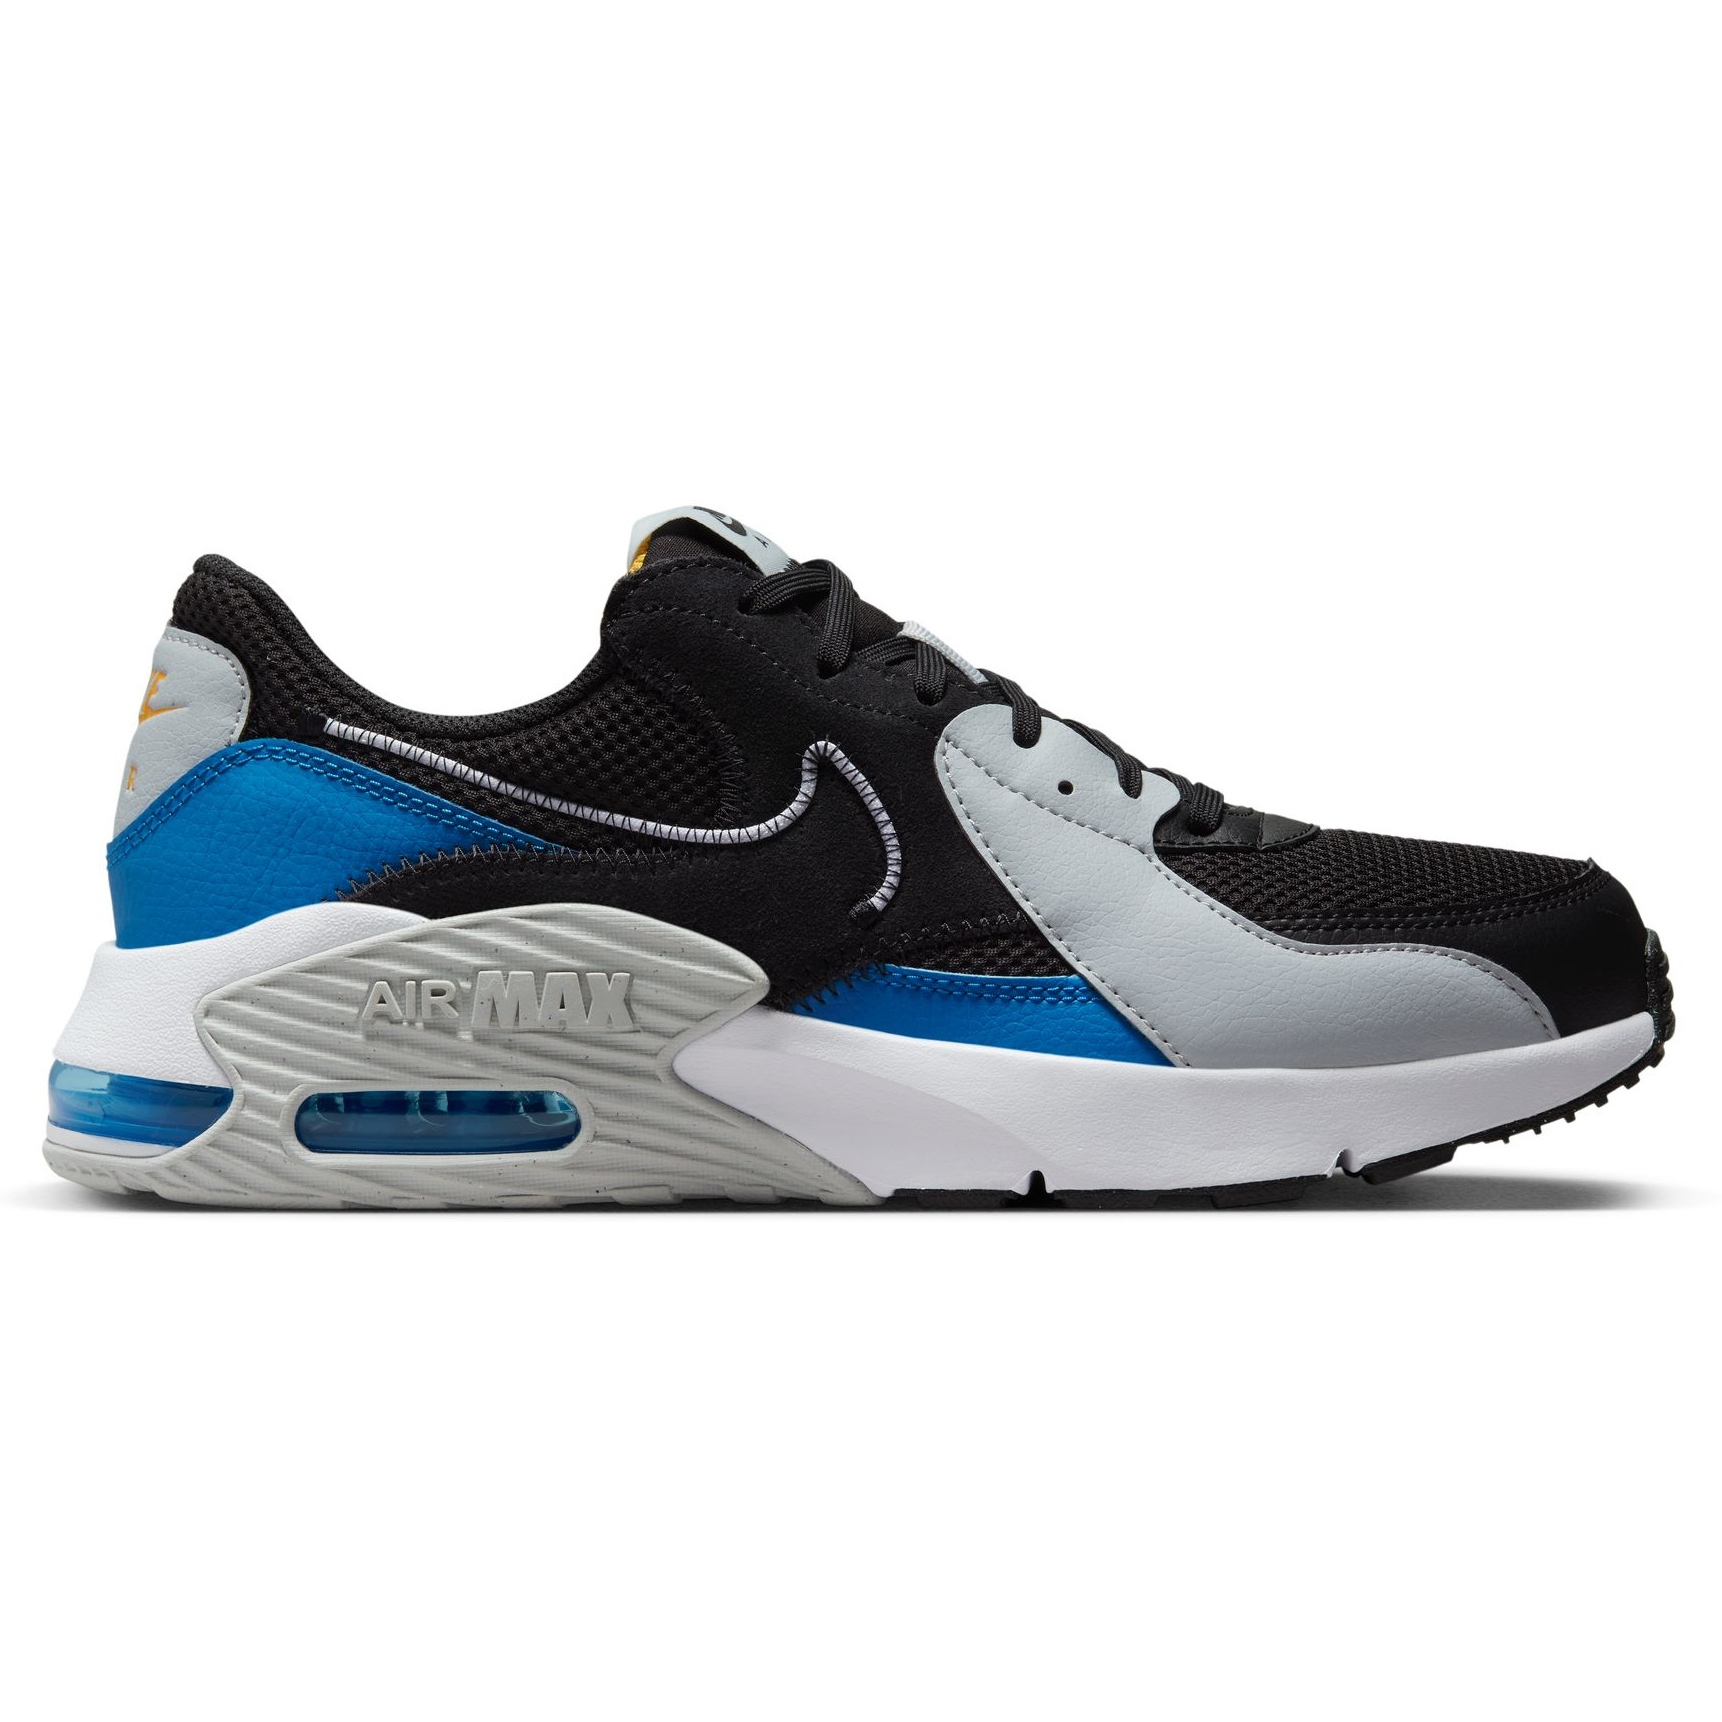 Nike Chaussures Homme - Air Max Excee - black/white-photo blue ...